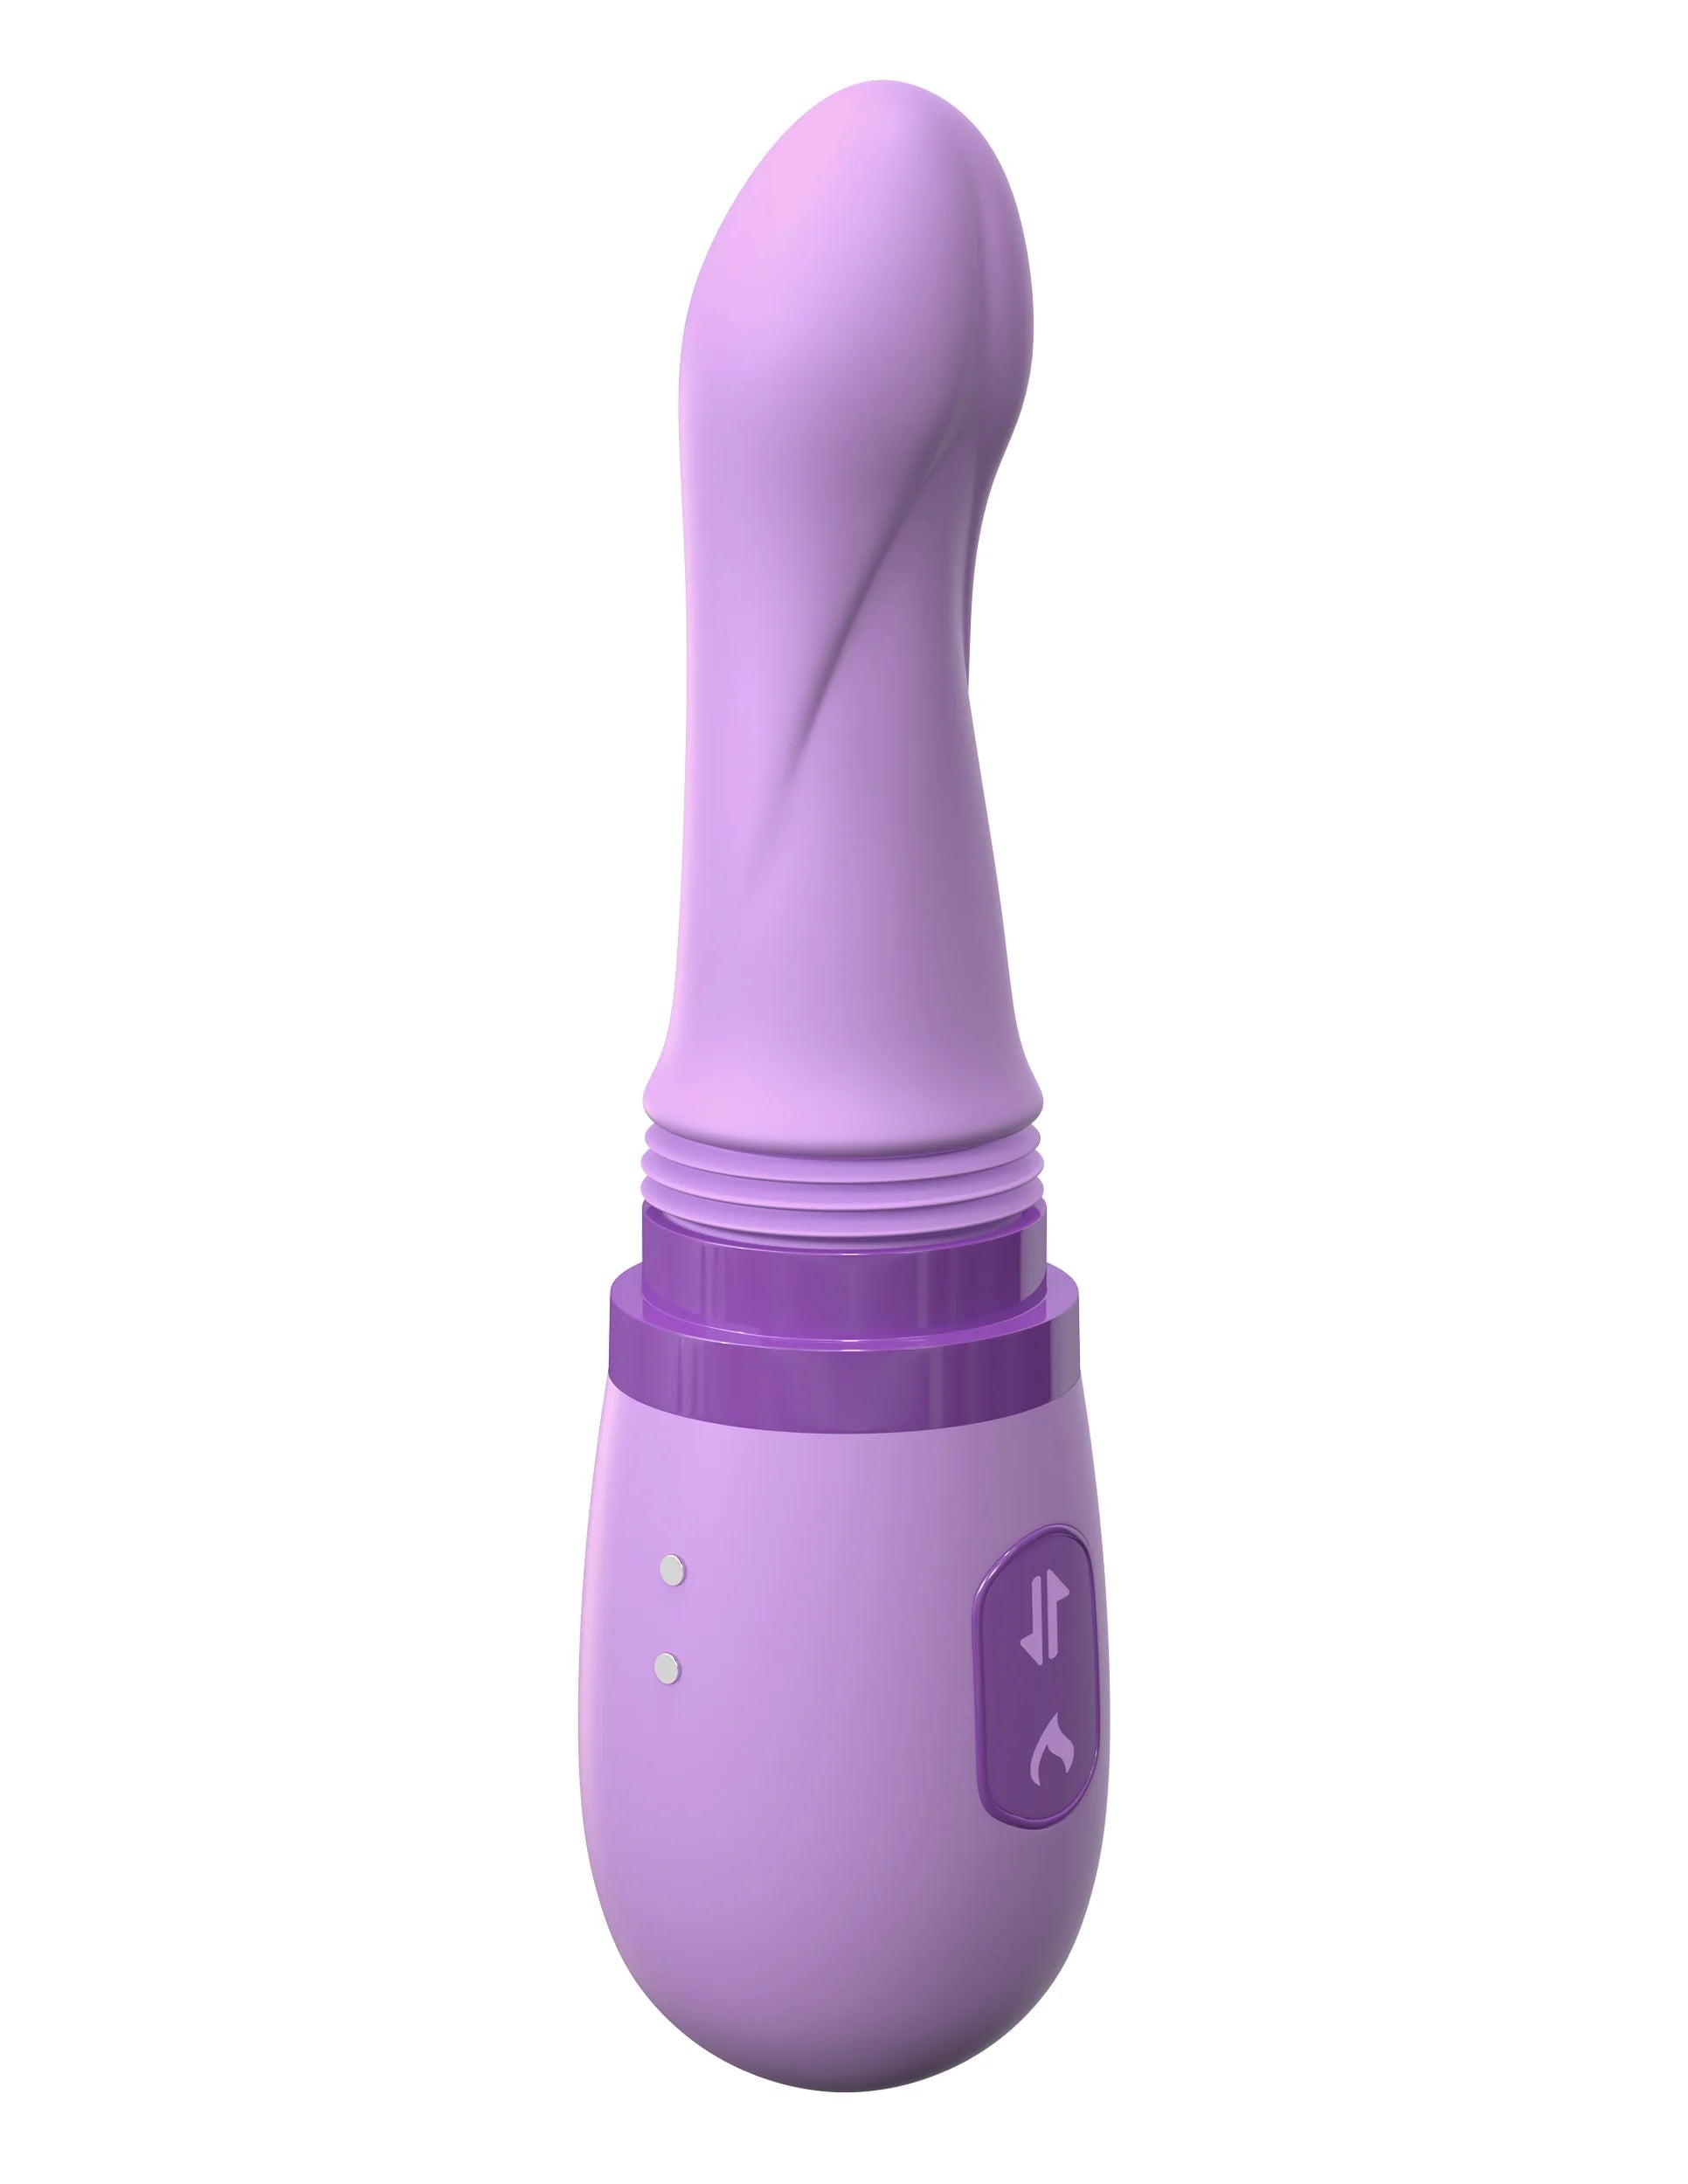 Pipedream Fantasy For Her Personal Thrusting and Warming Vibrator